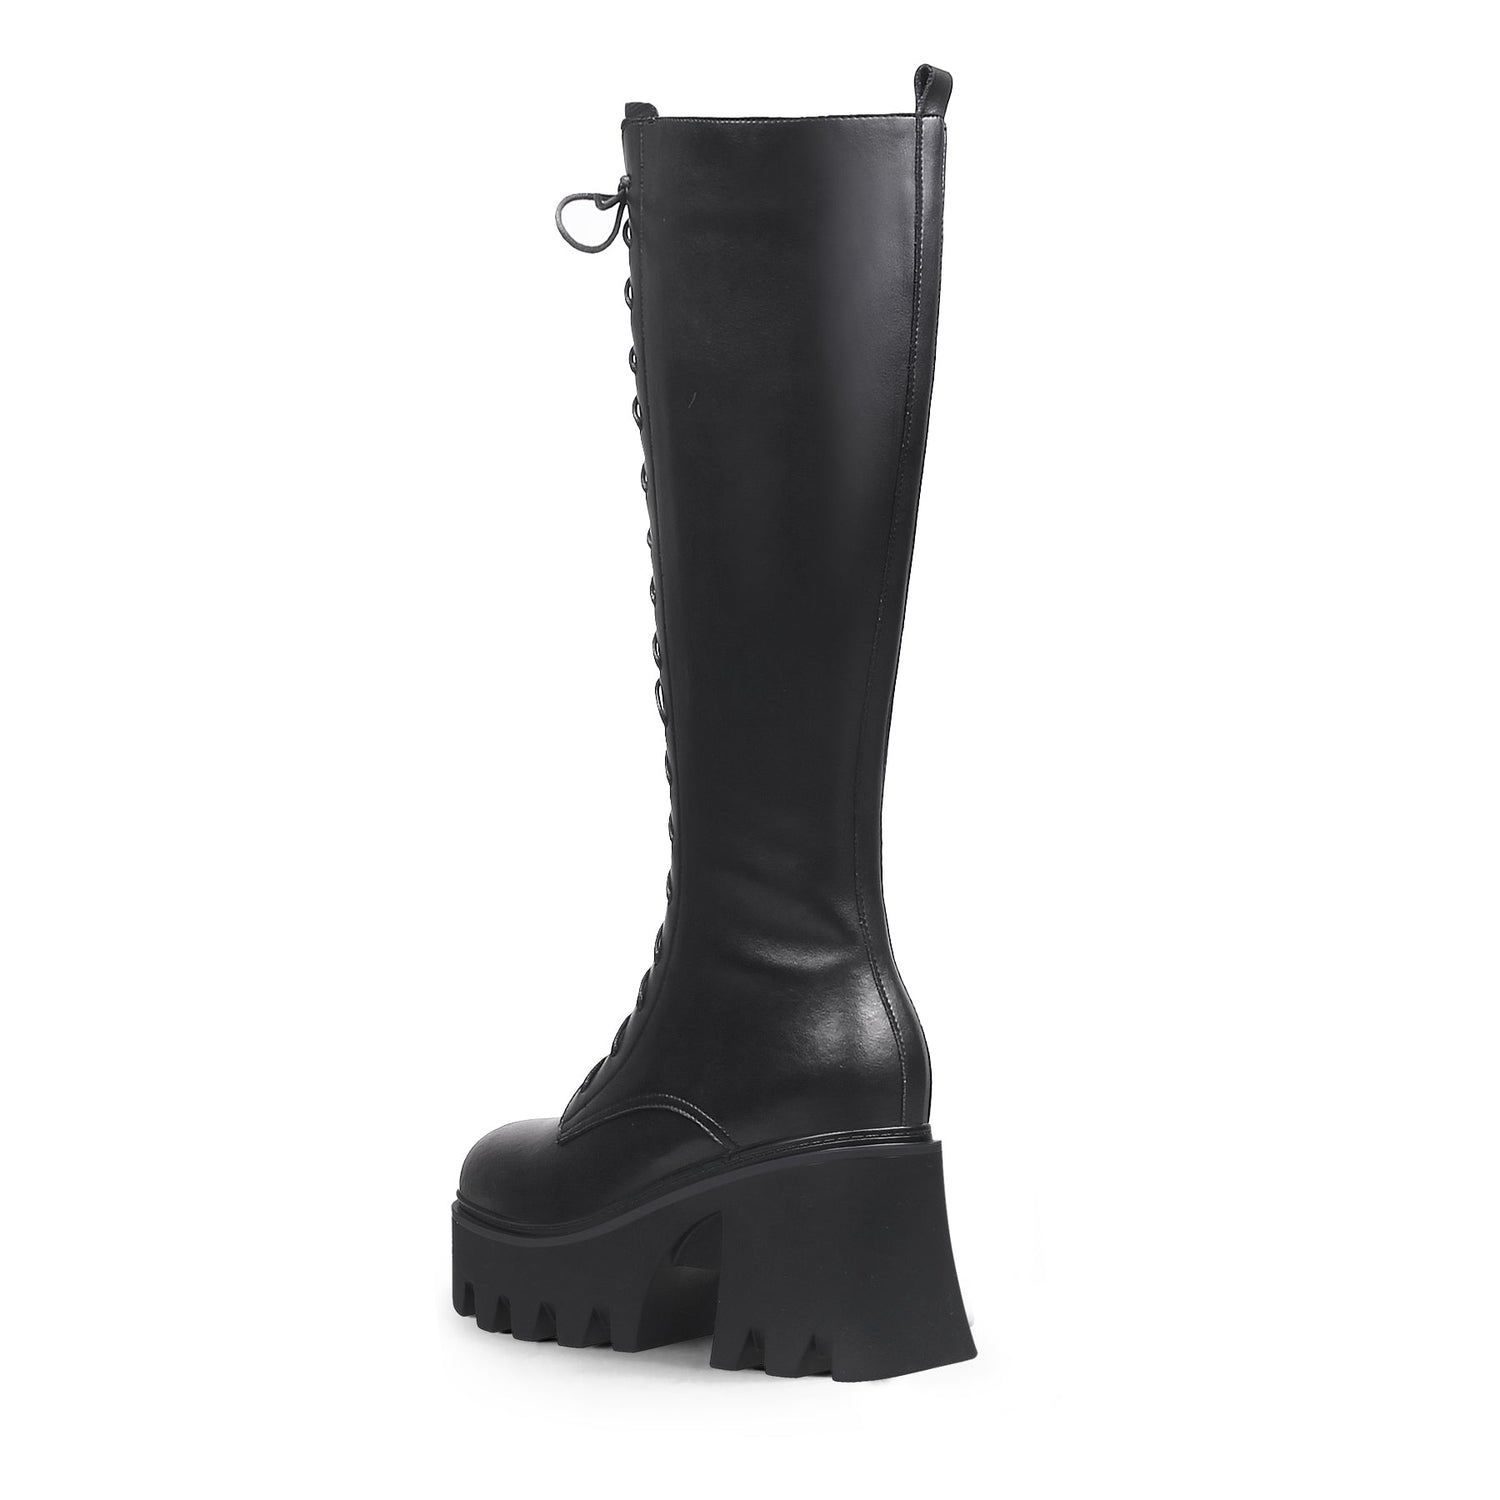 Glamourous Lace-Up Black Knee-High Boots